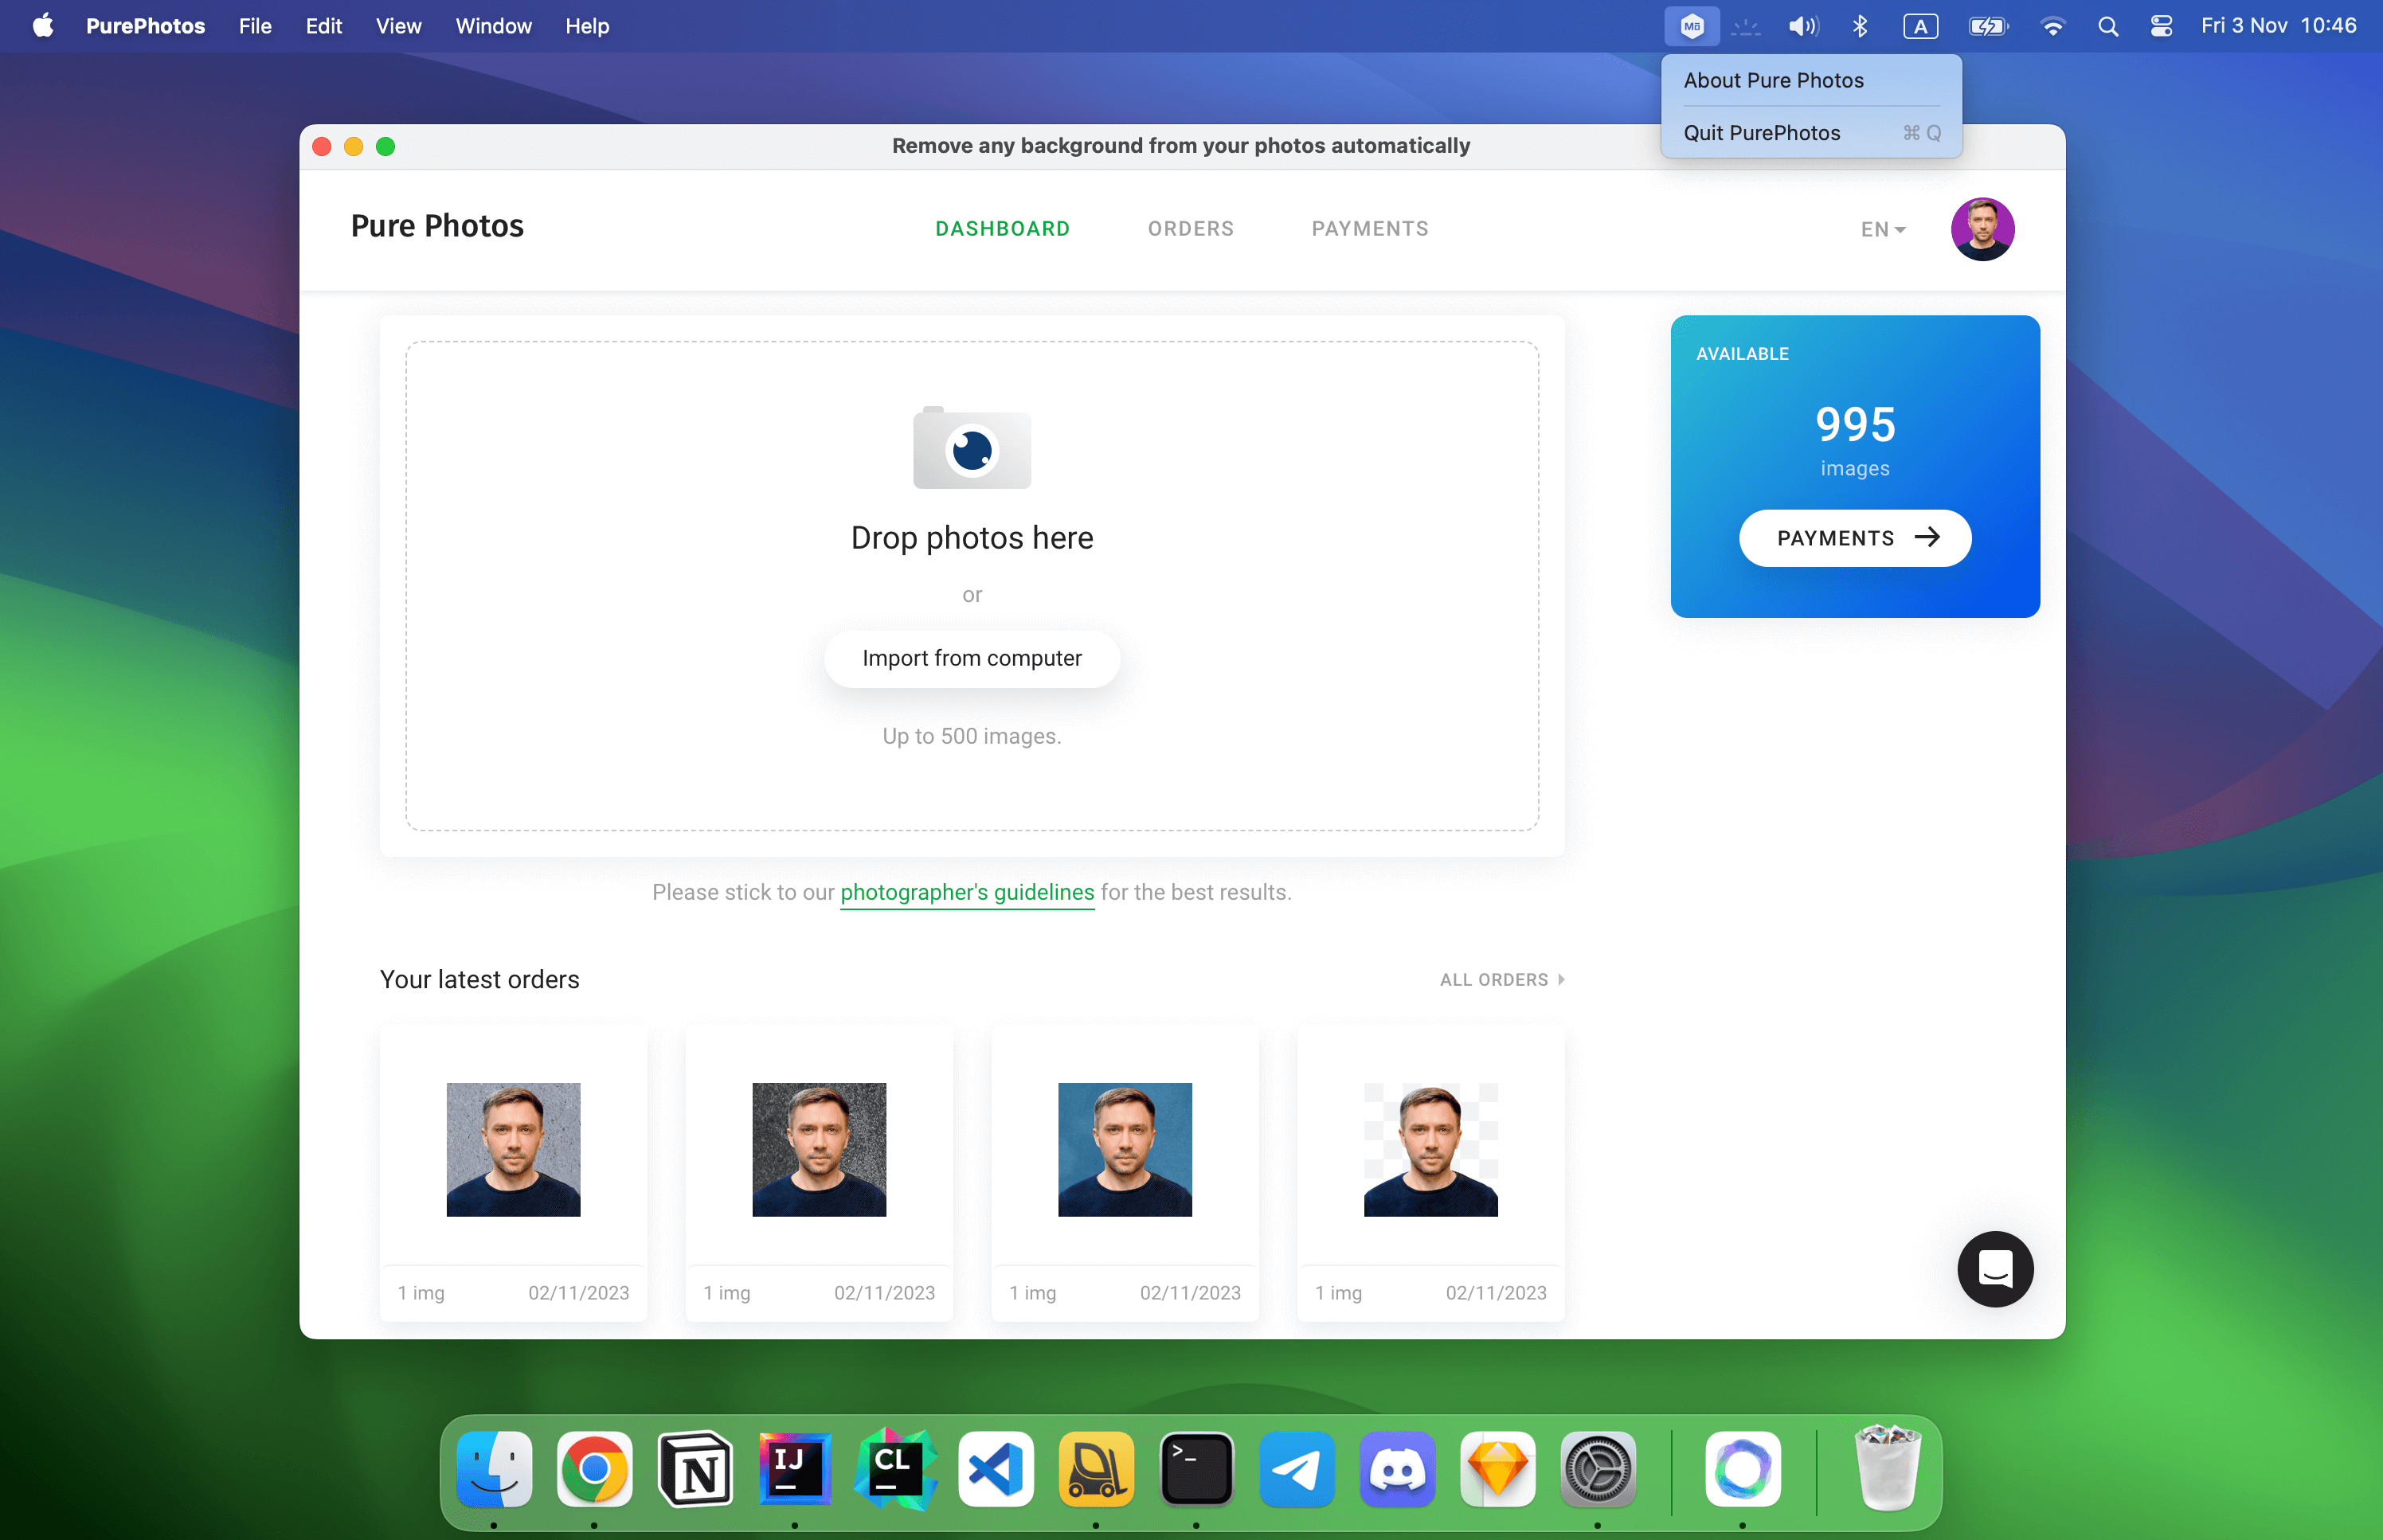 Pure Photos app dashboard page